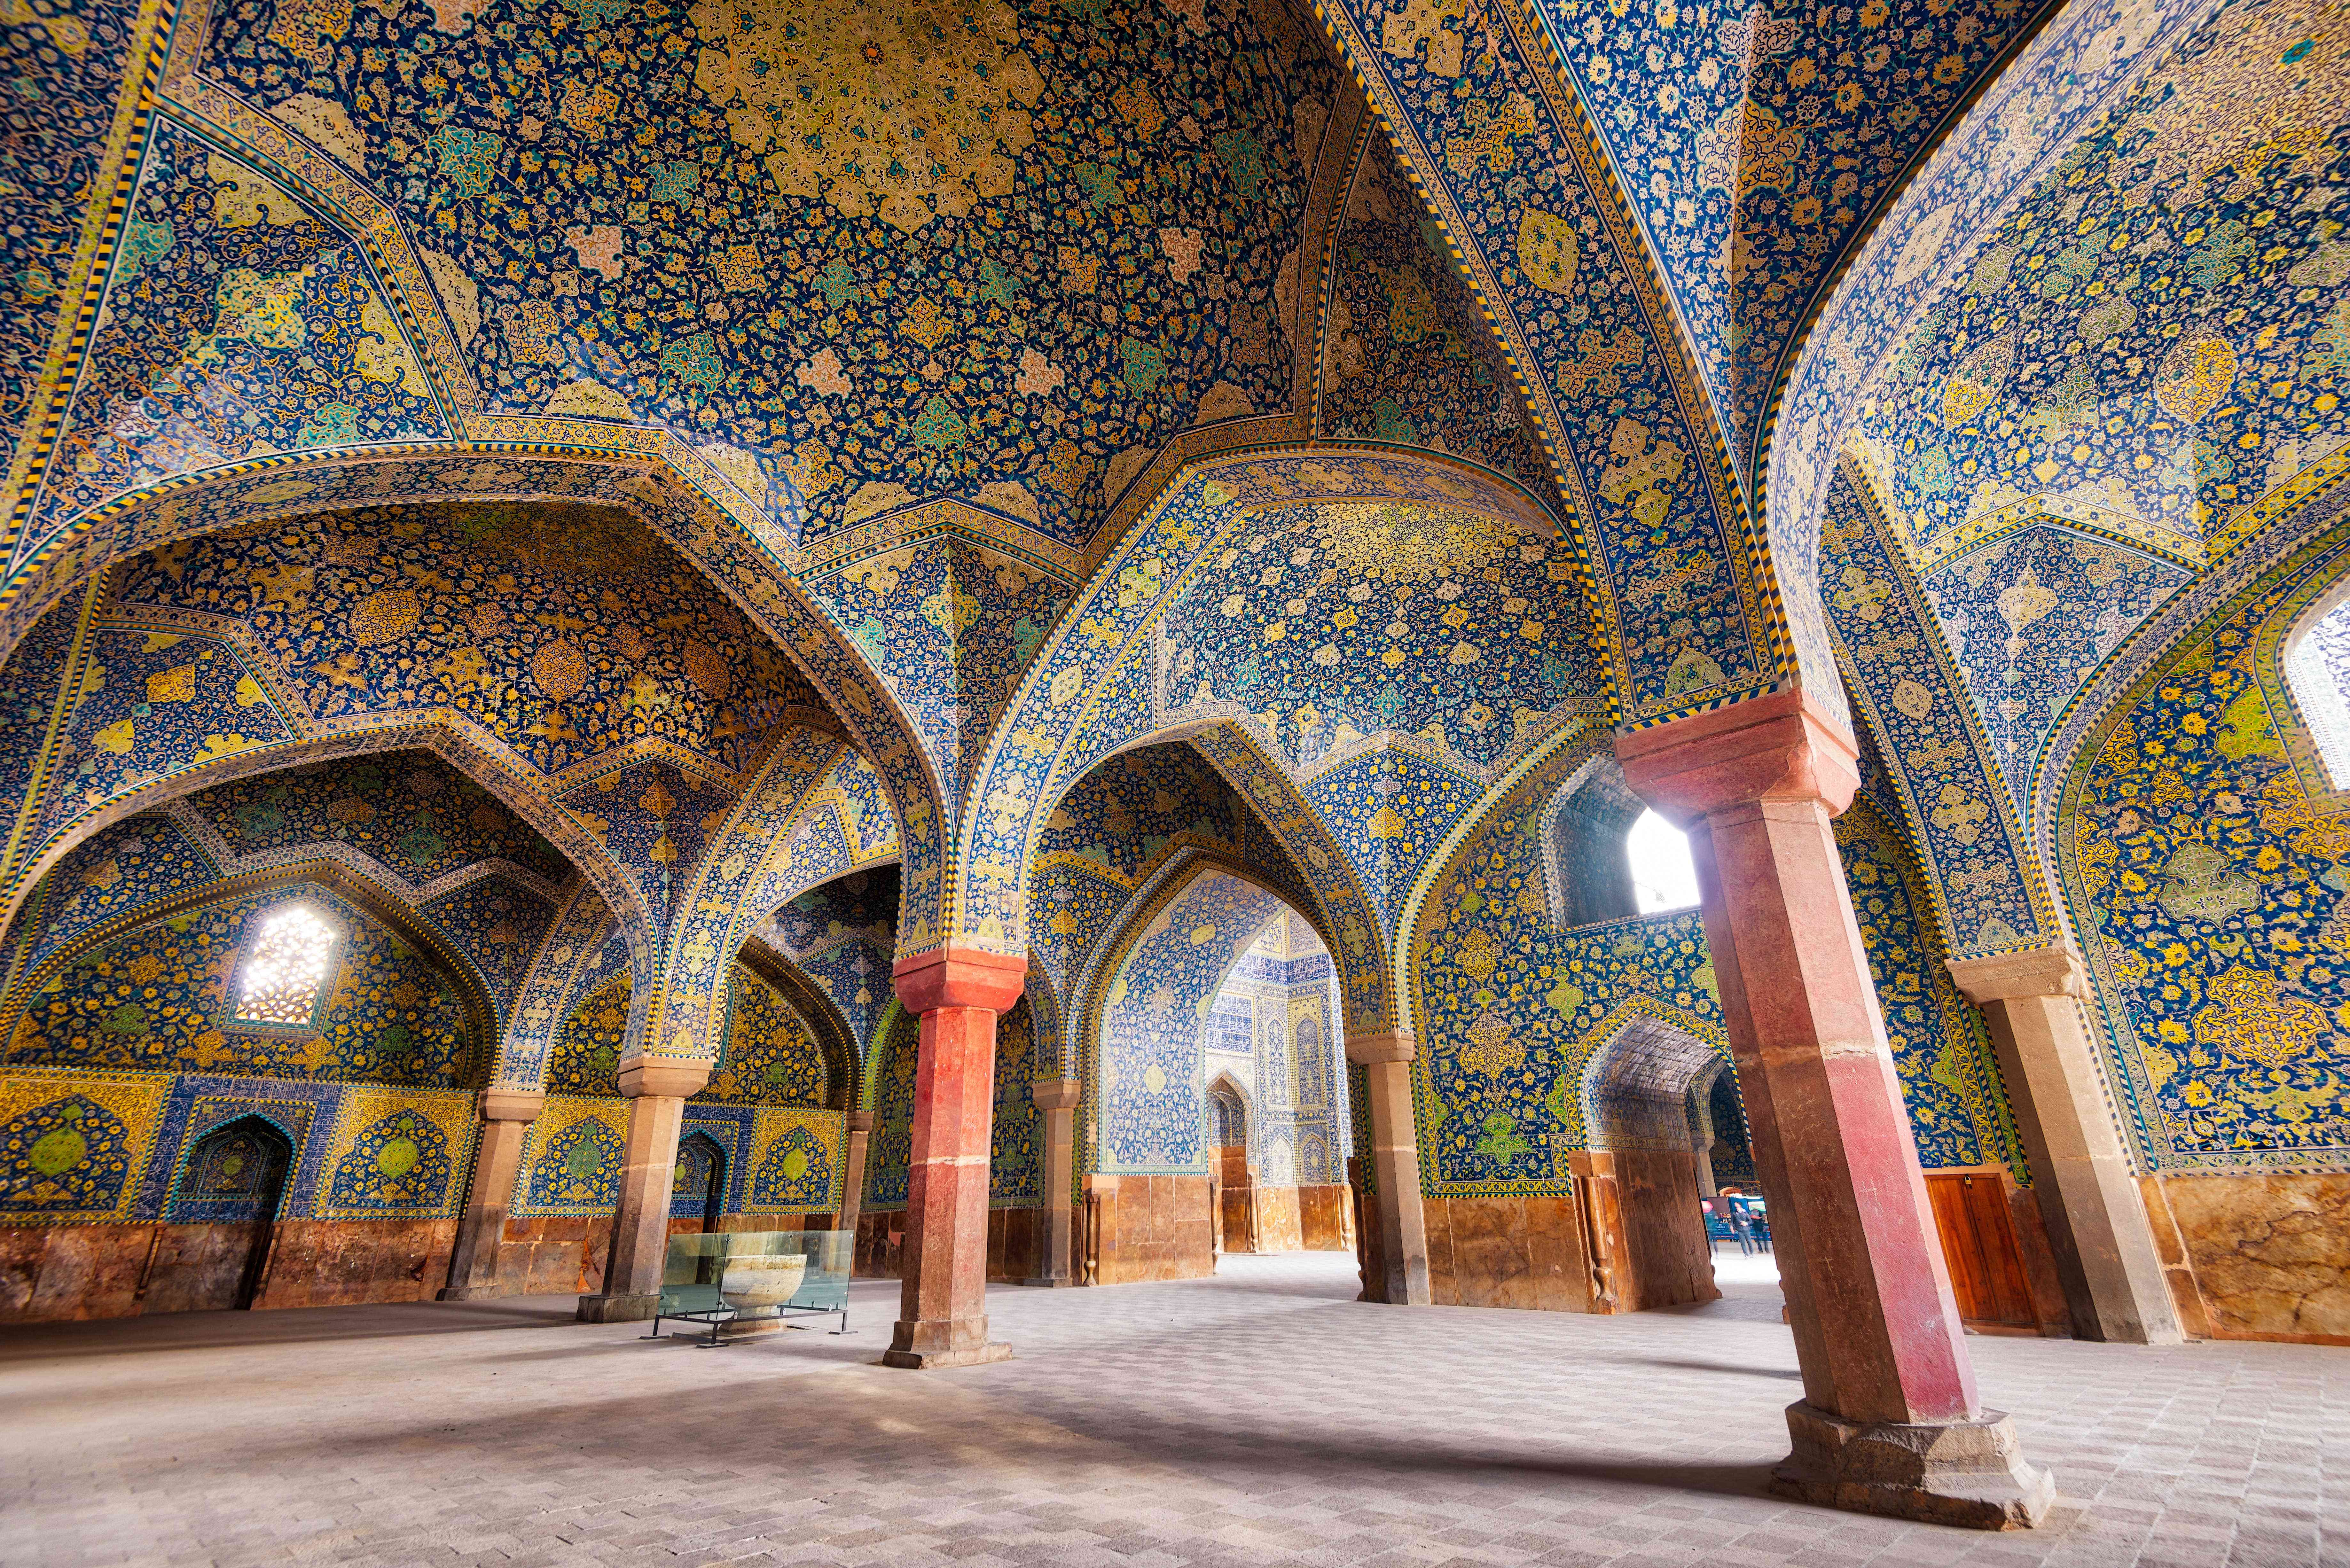 Shah Mosque in Isfahan, Iran: One of the world's most beautiful mosques, it is known for its splendid architecture and seven-colour mosaic tilework